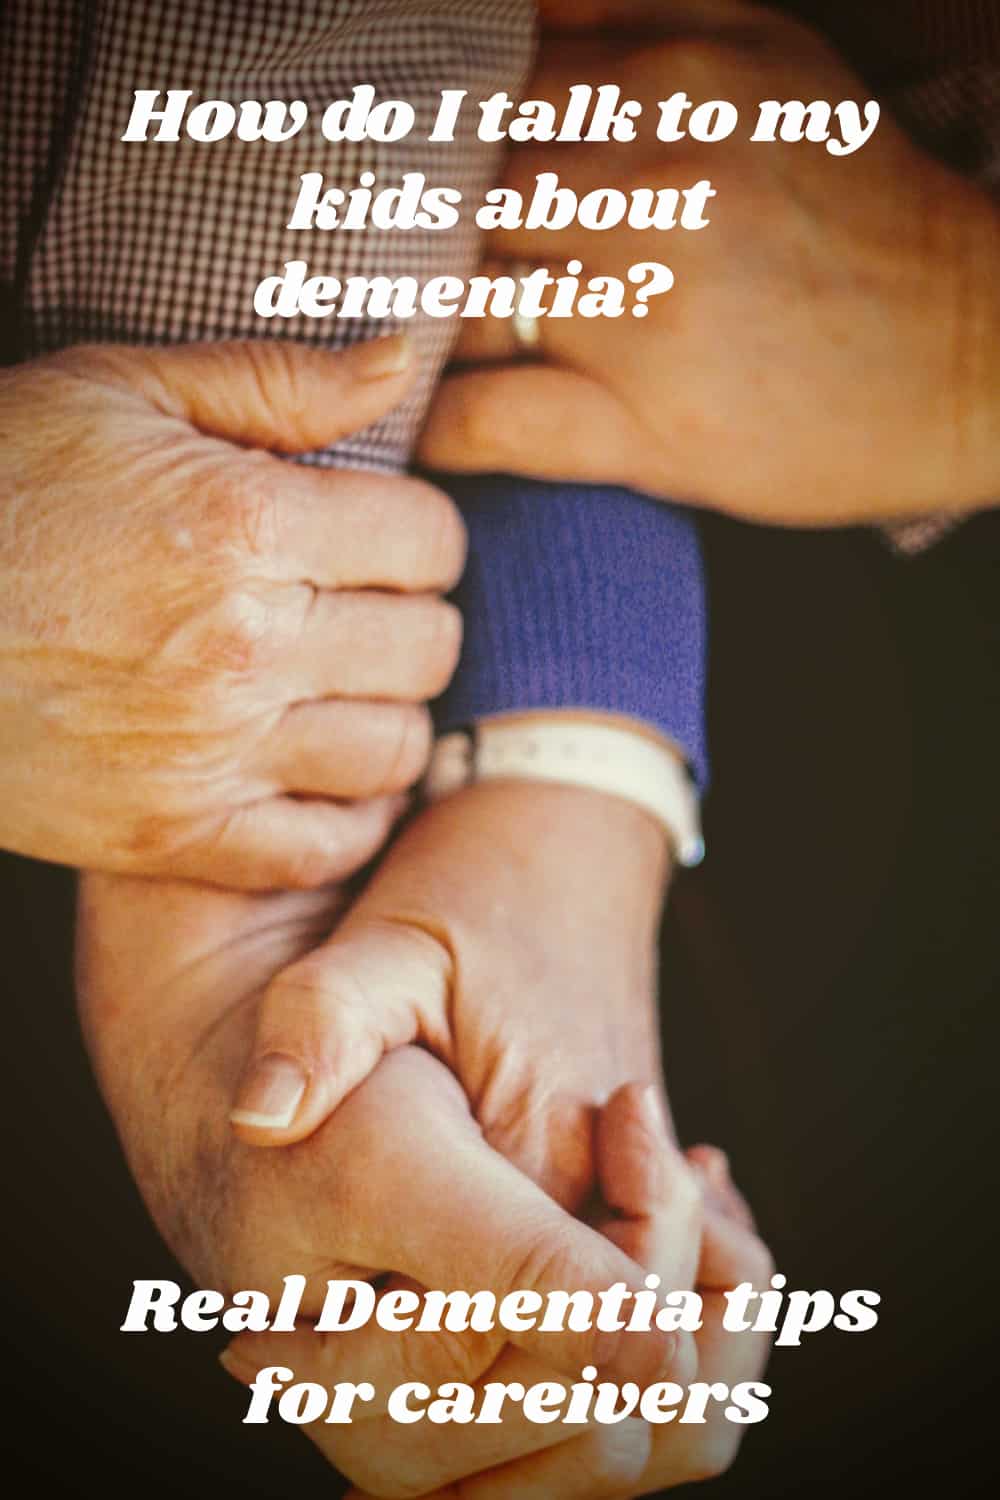 How do I talk to my kids about dementia?